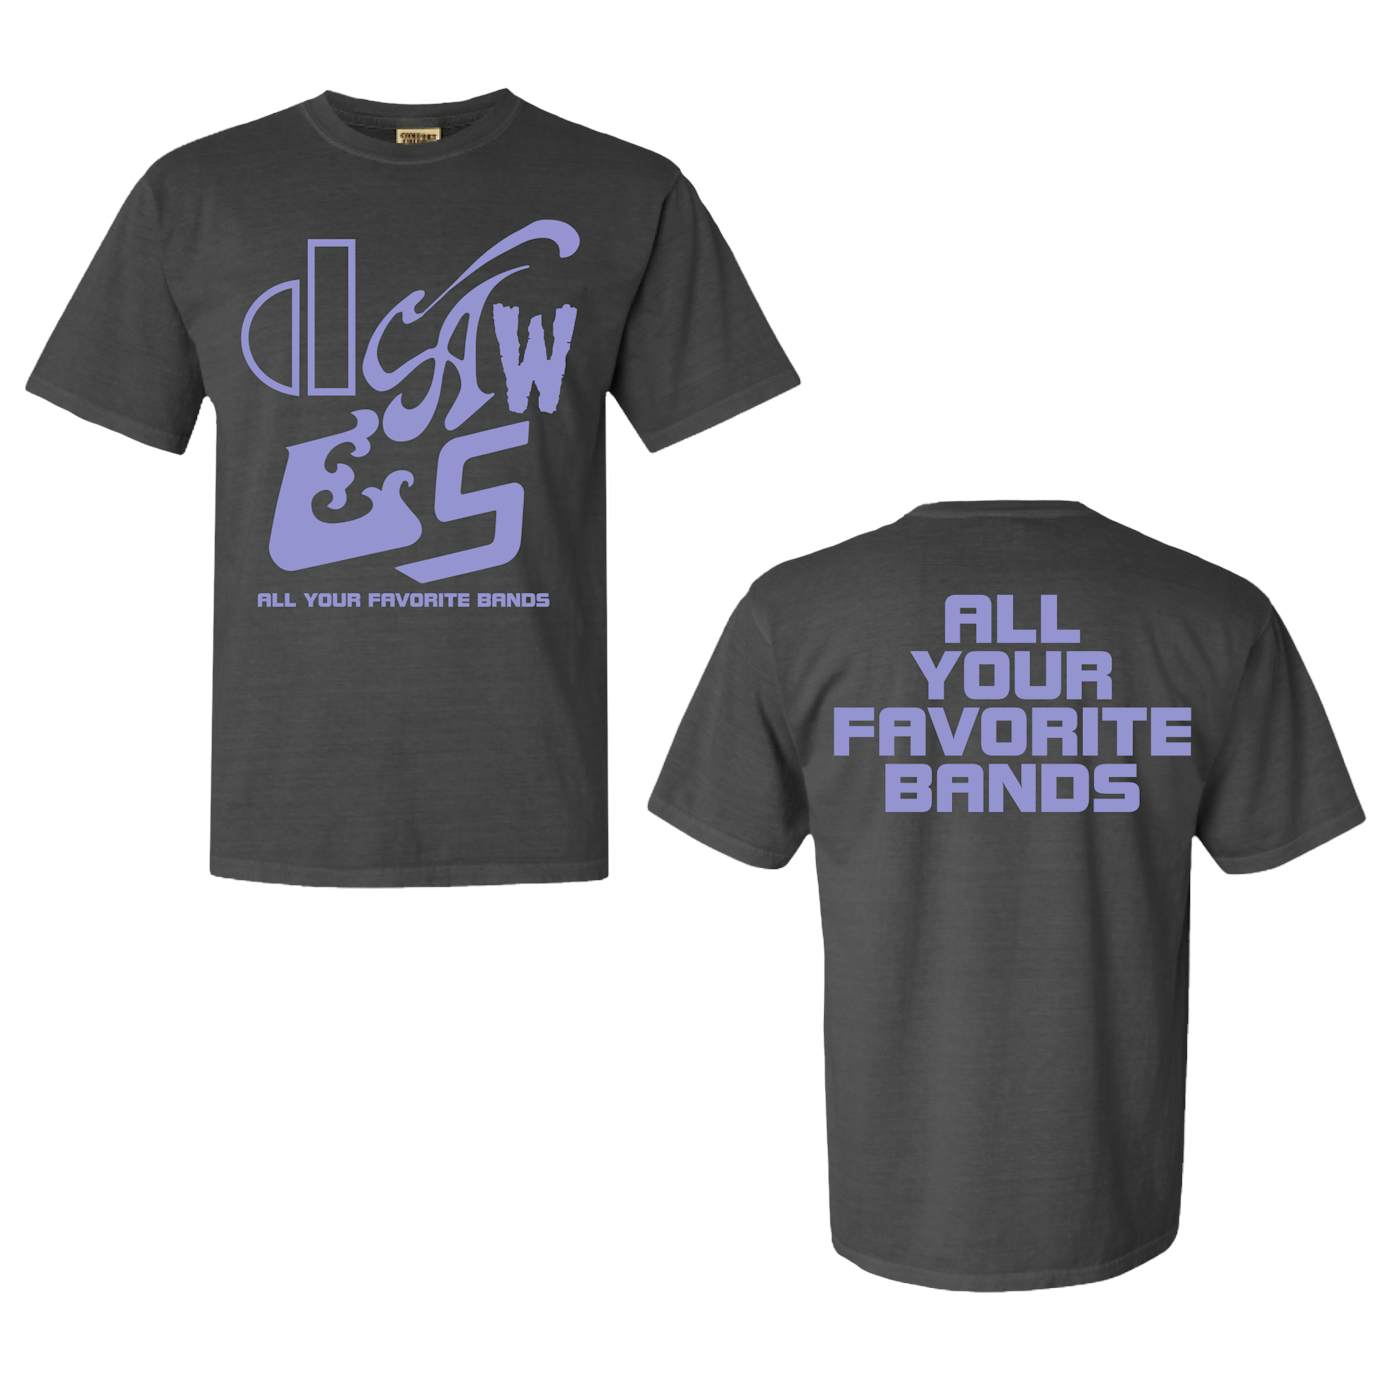 Dawes All Your Favorite Bands Tee